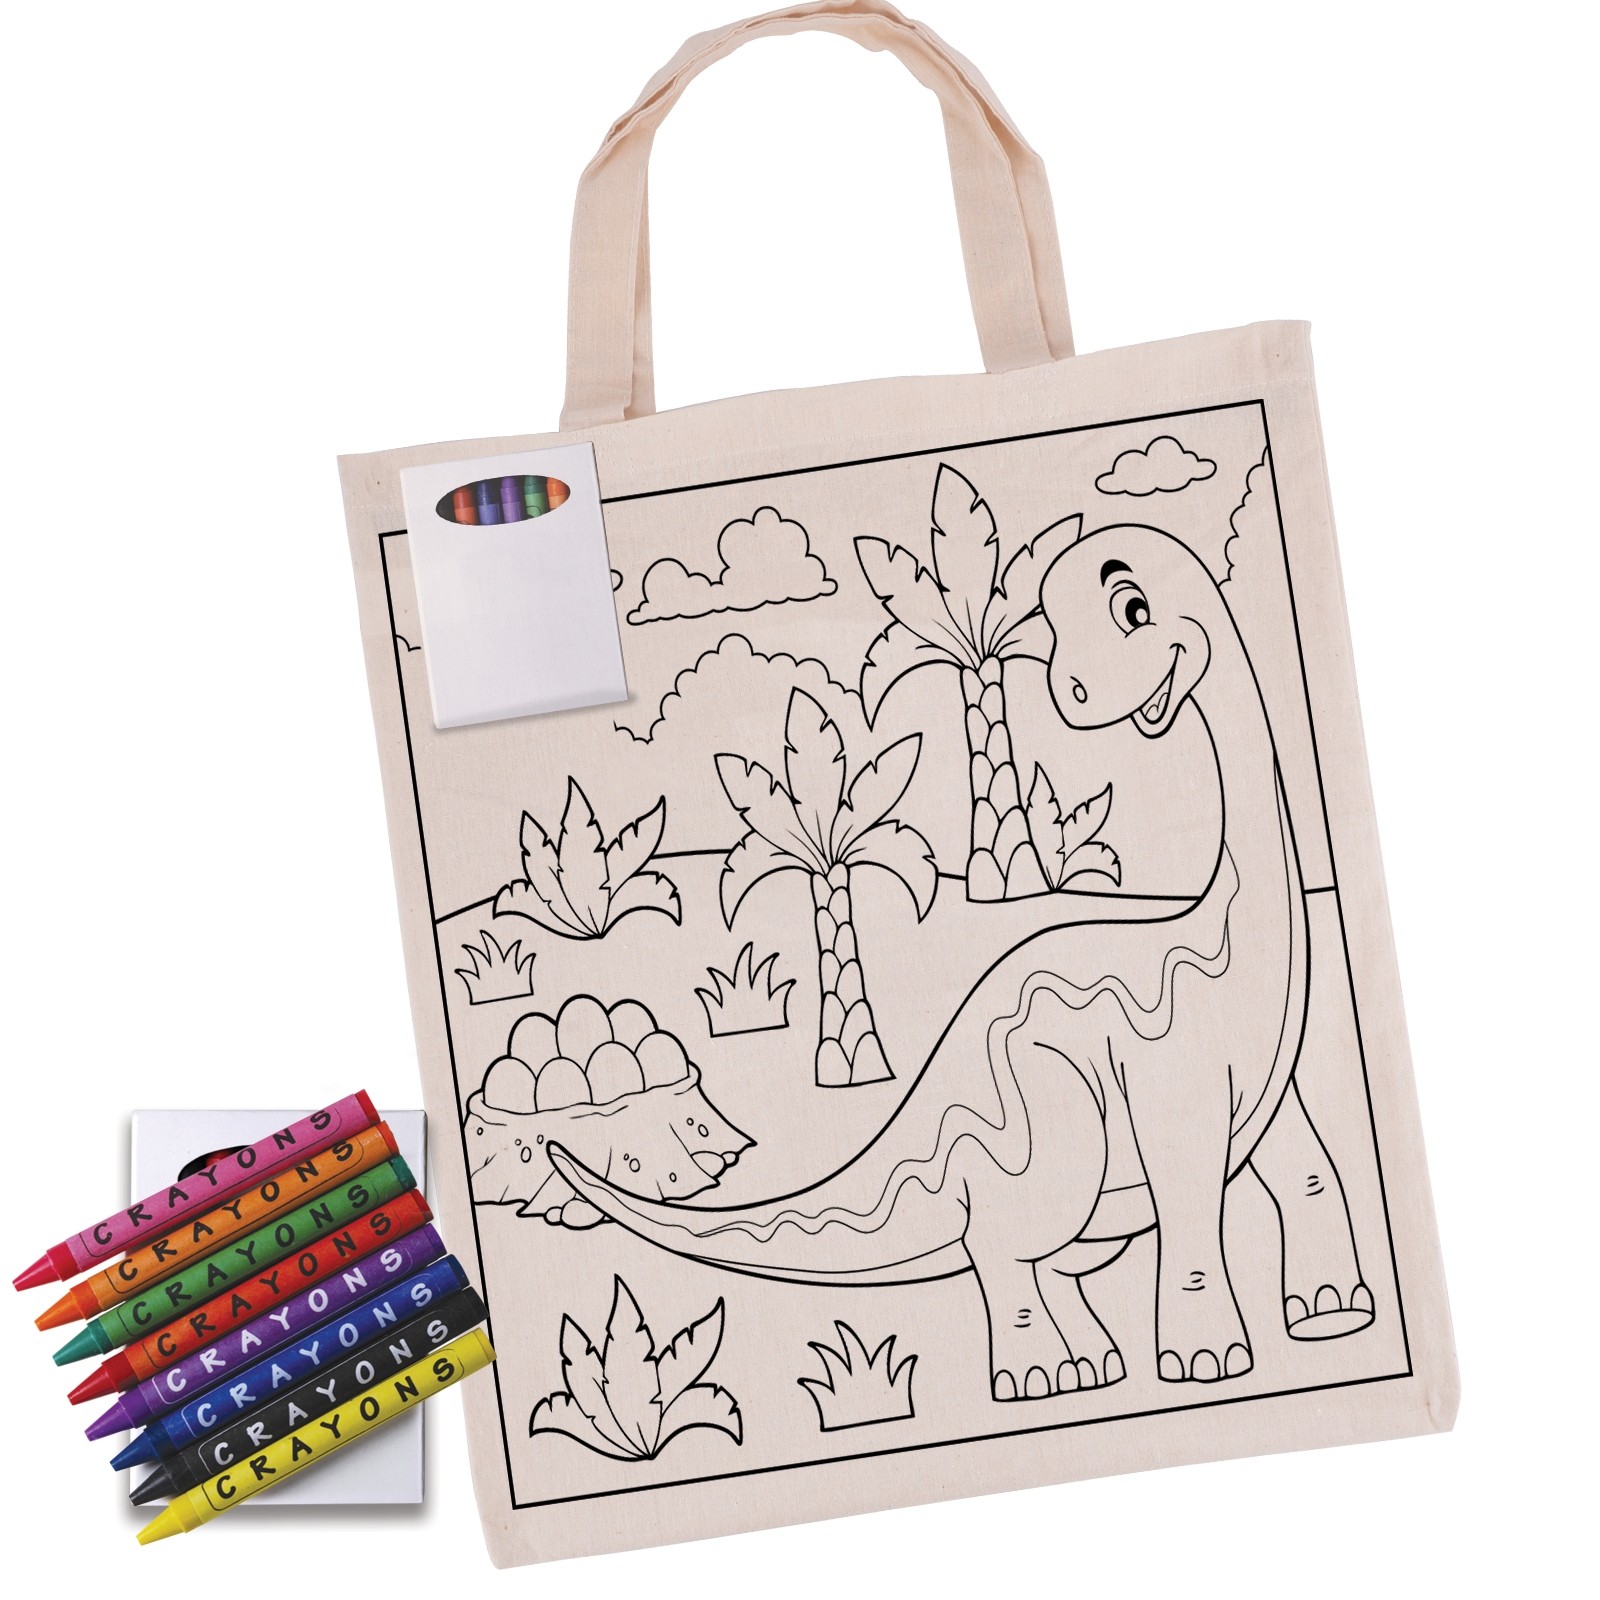 Colouring in Calico Bag with Crayons custom branded-30